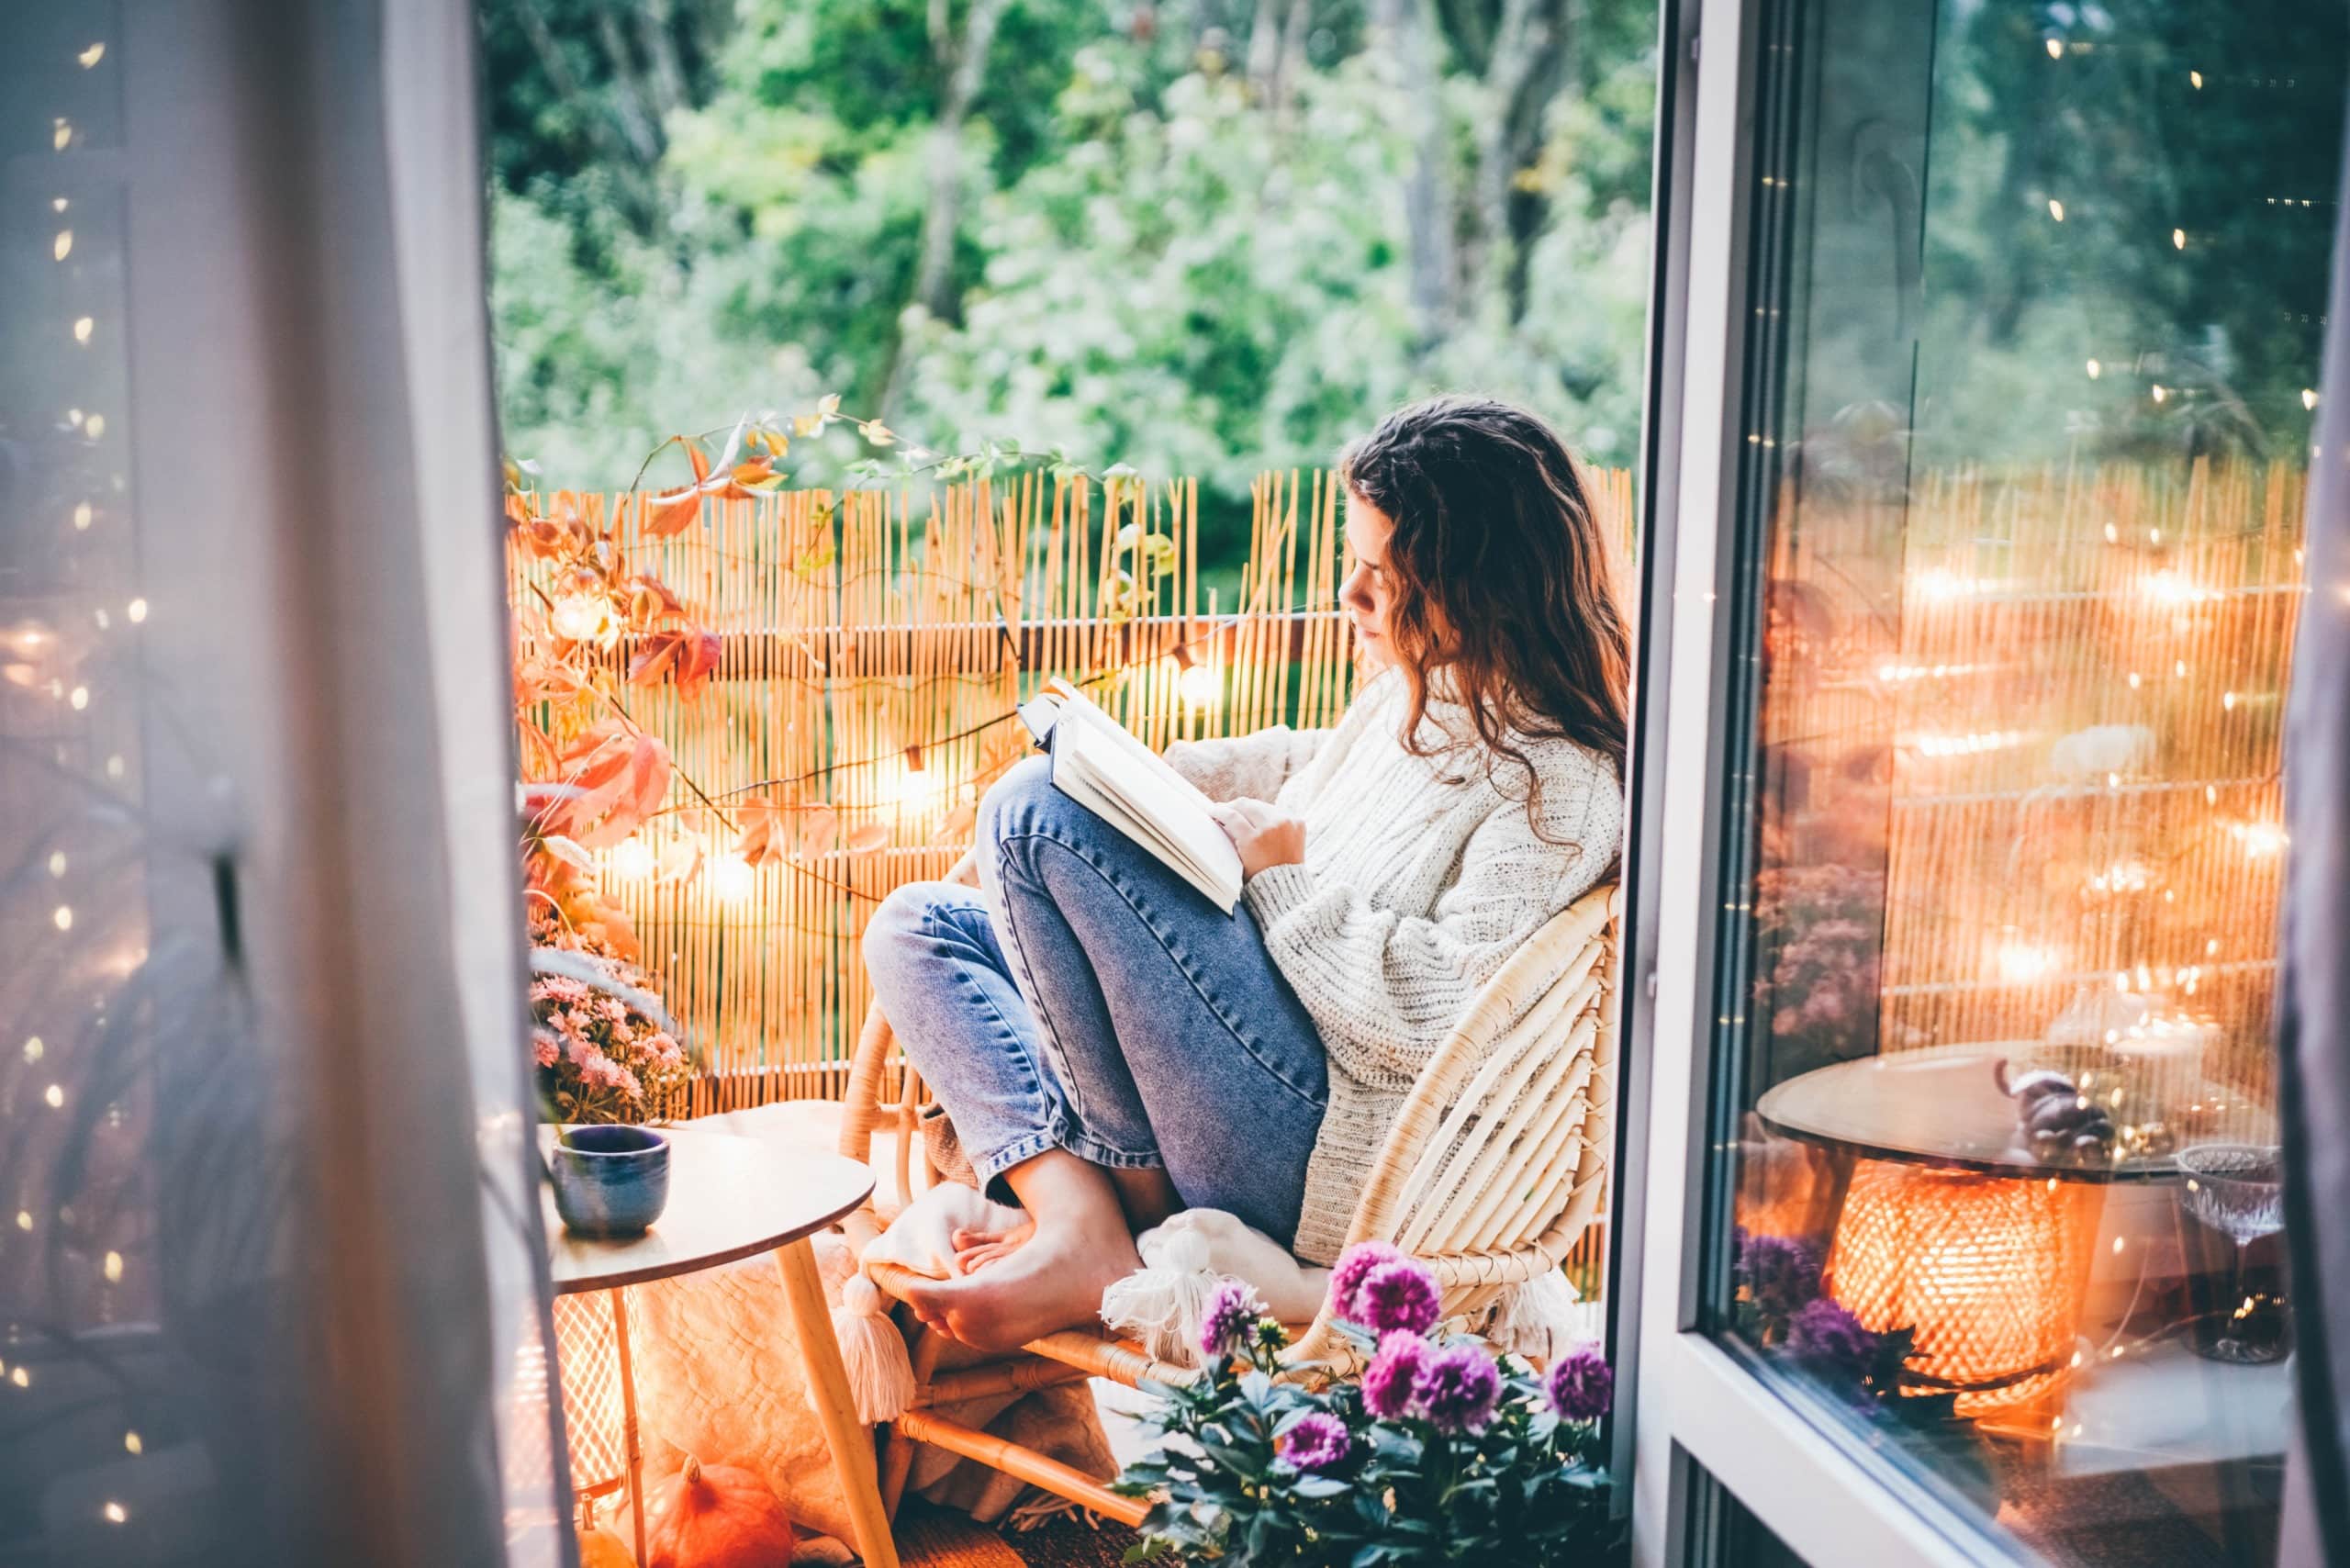 Woman relaxing on cozy balcony, reading a book.